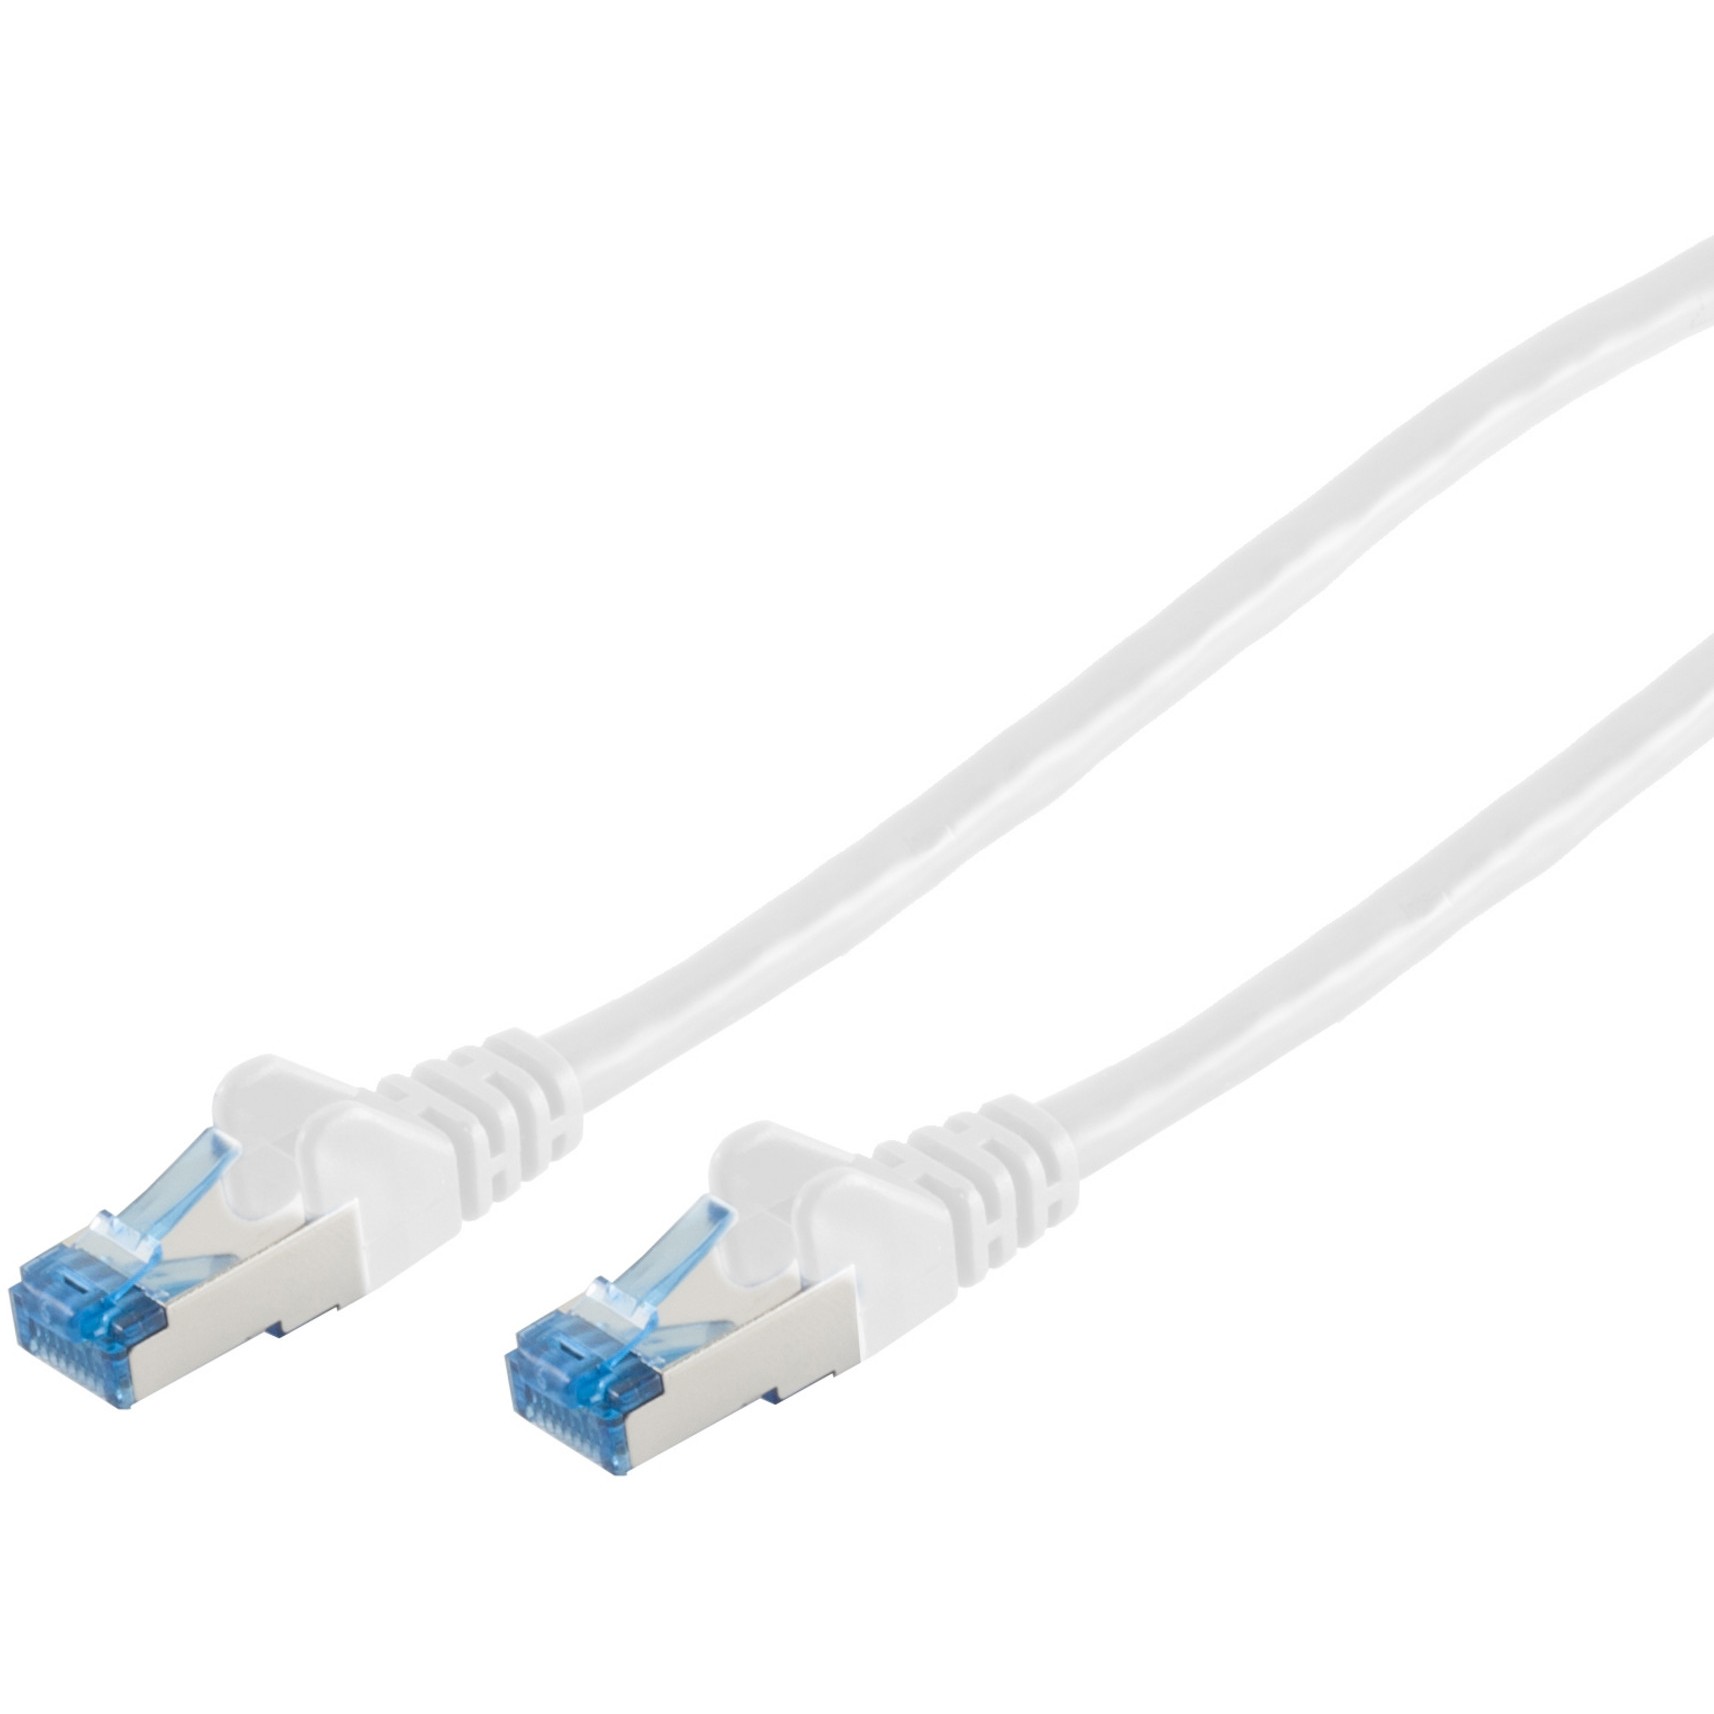 S-Conn 75717-W networking cable